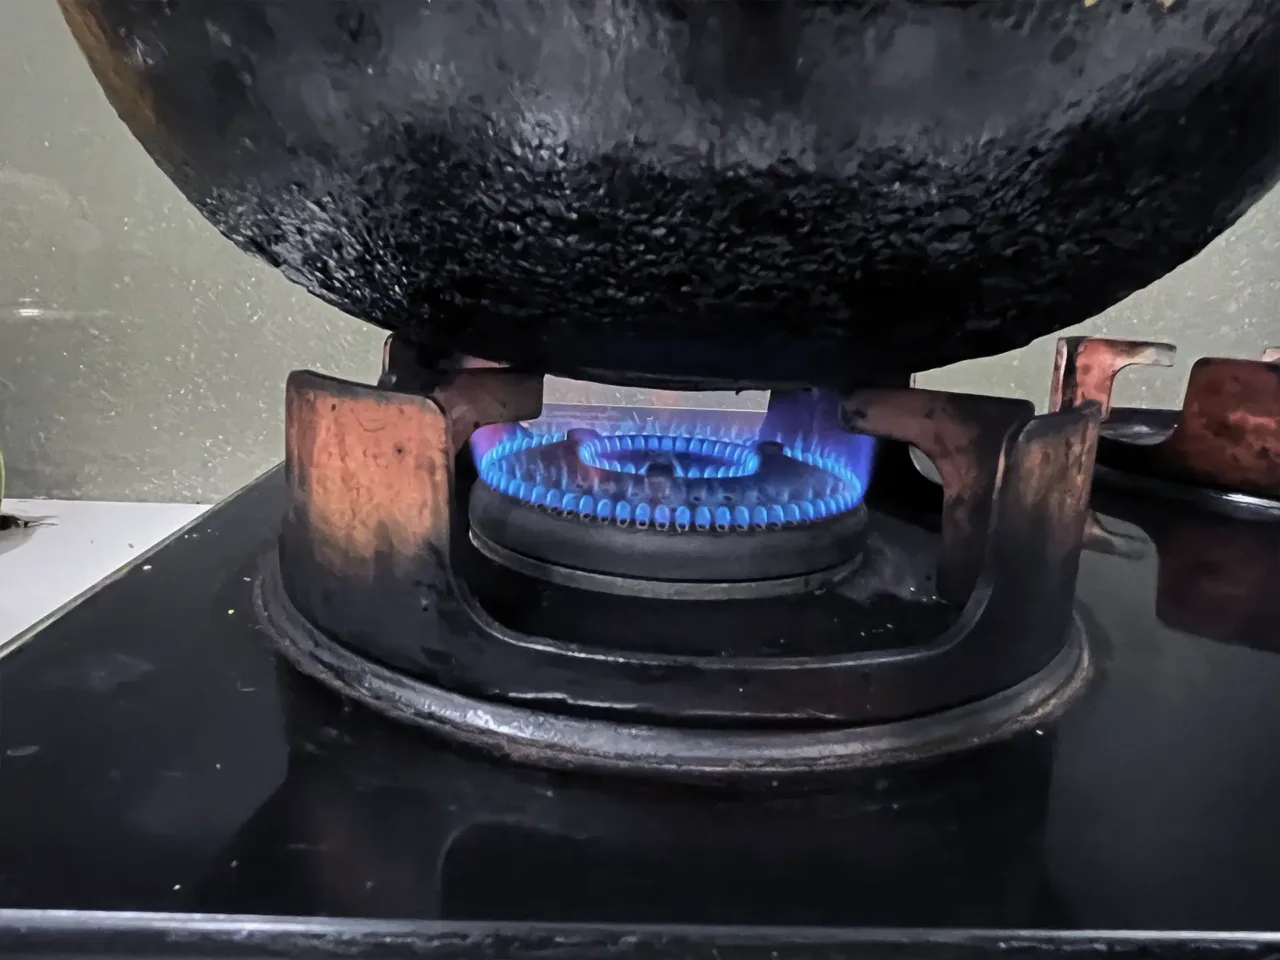 Burner in a gas stove